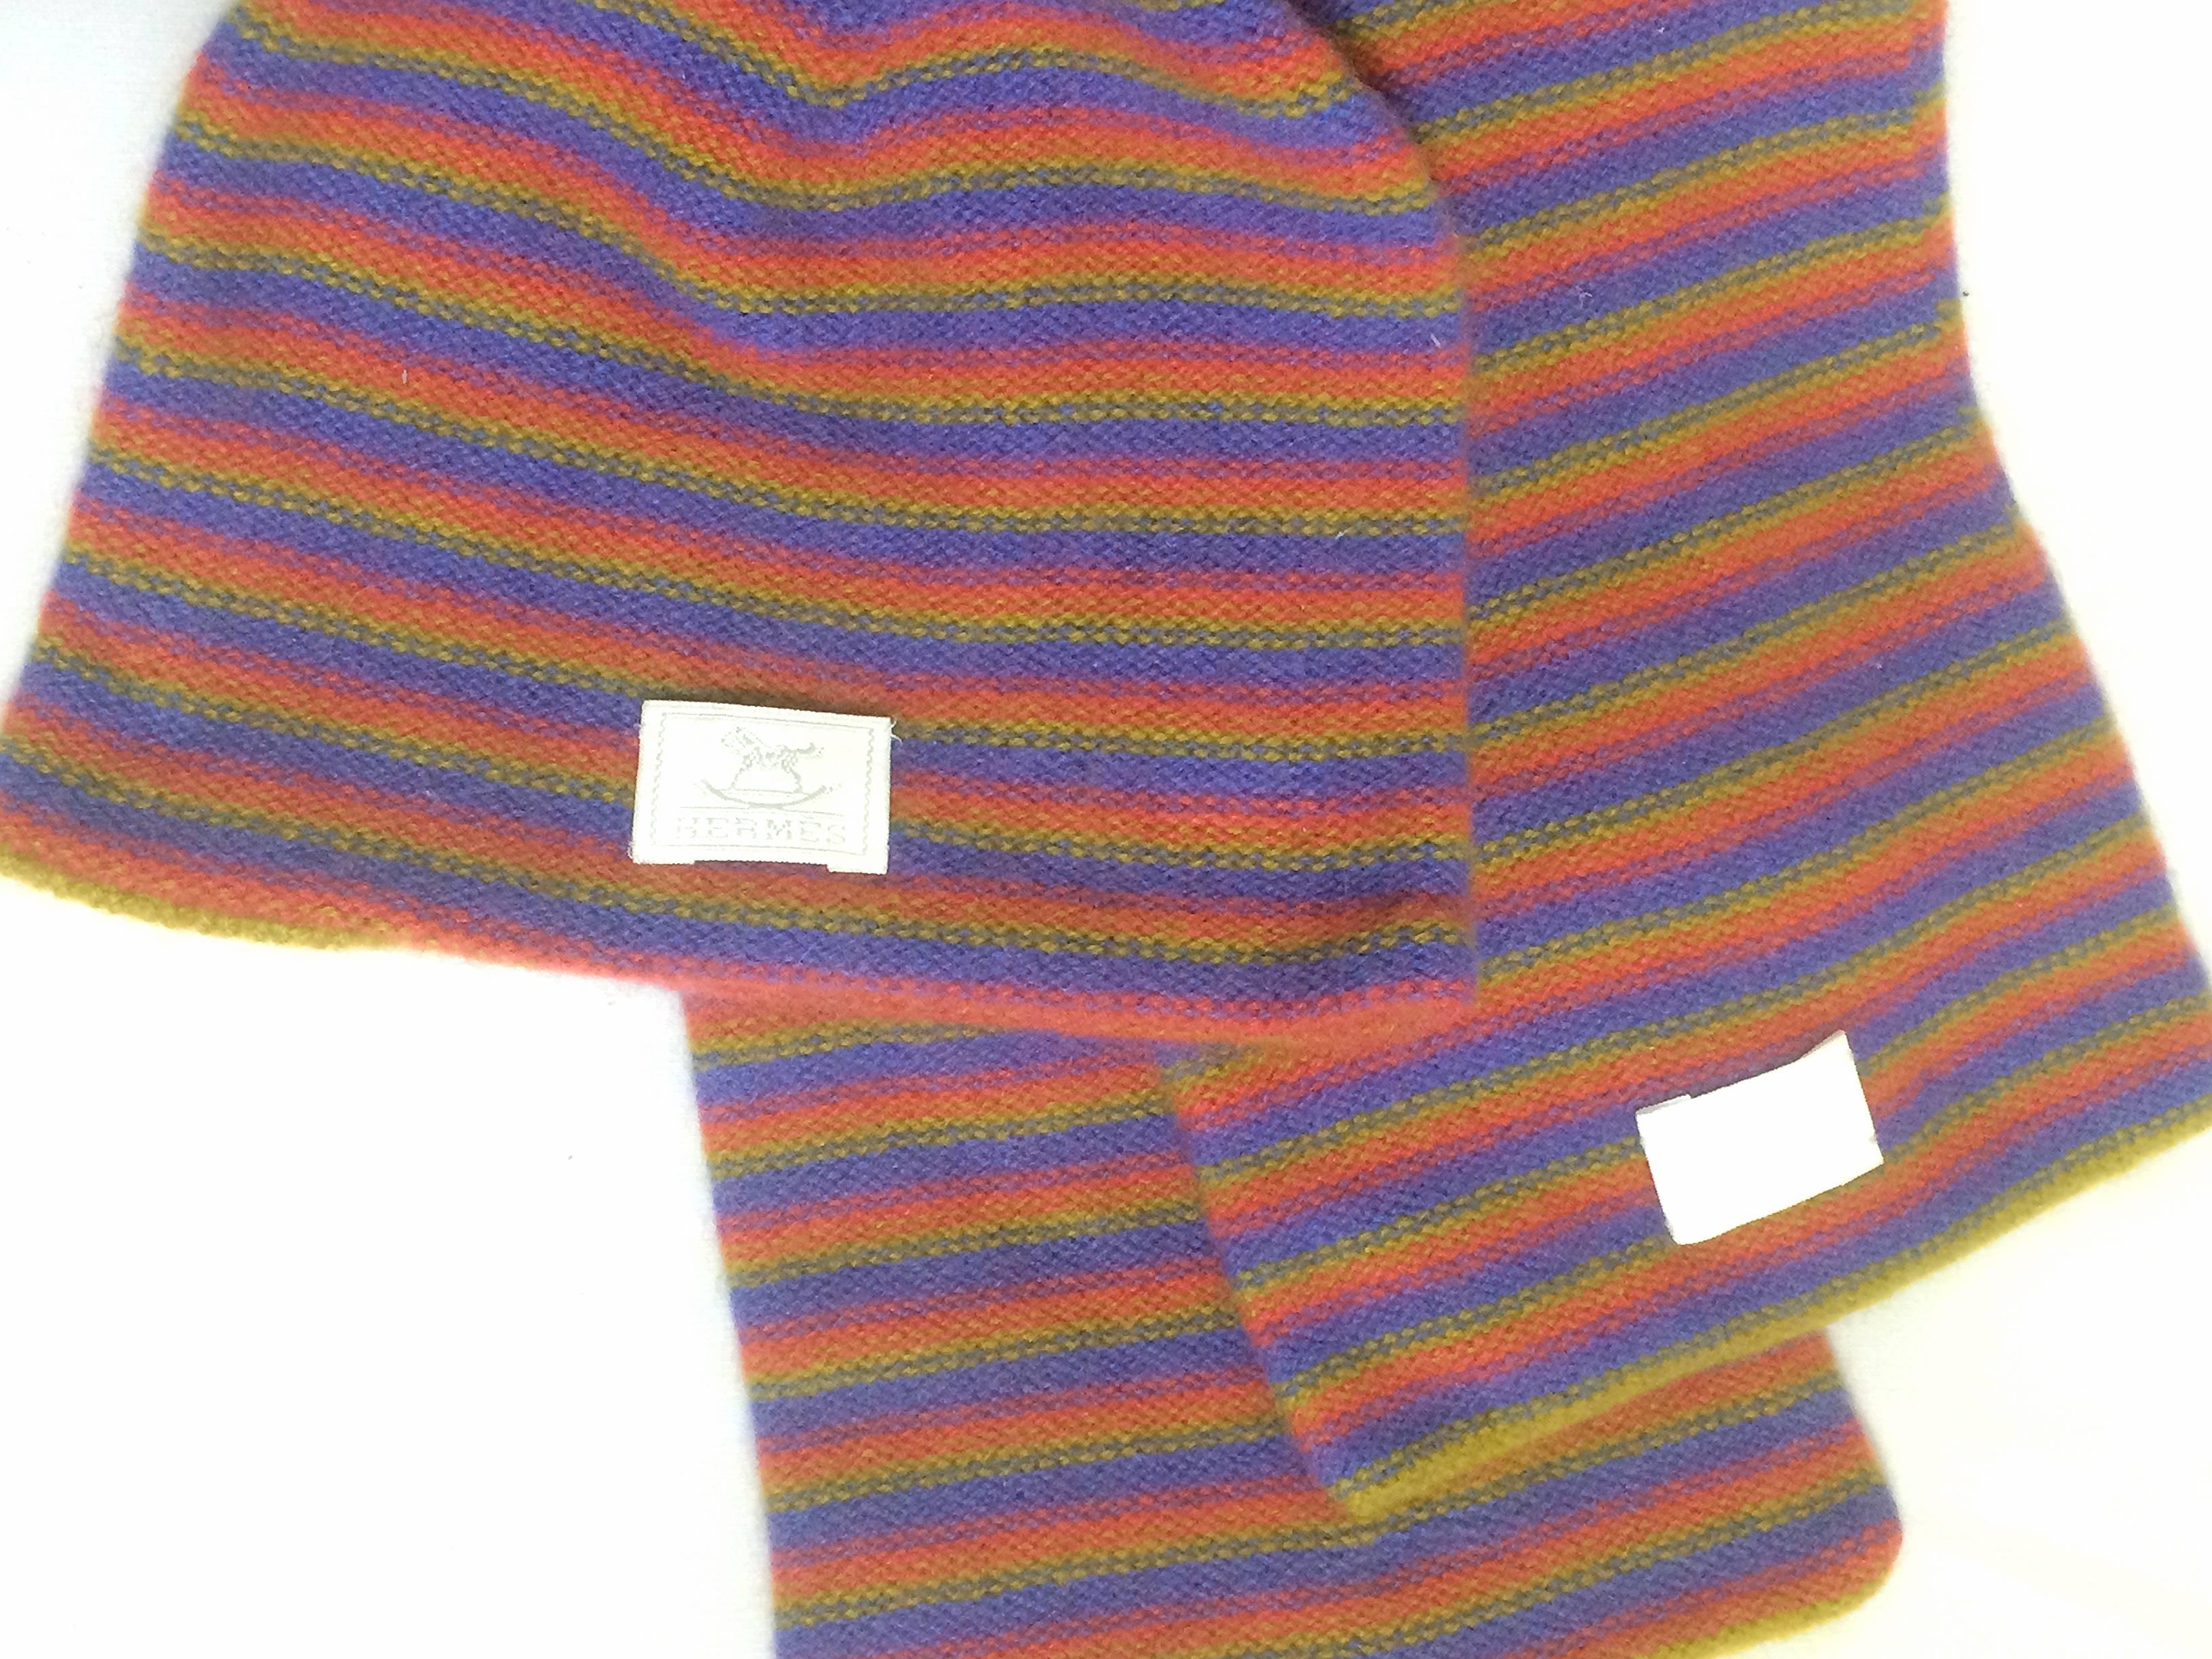 MINT/excellent condition!
***Please note, these are for Kids/Babies. ***

Hermes 100% Cashmere knit kids/baby scarf and cap/hat in multiple color stripe in purple, olive yellow, and pink. Made in Italy. Unisex kids/babies.

This is a 100%